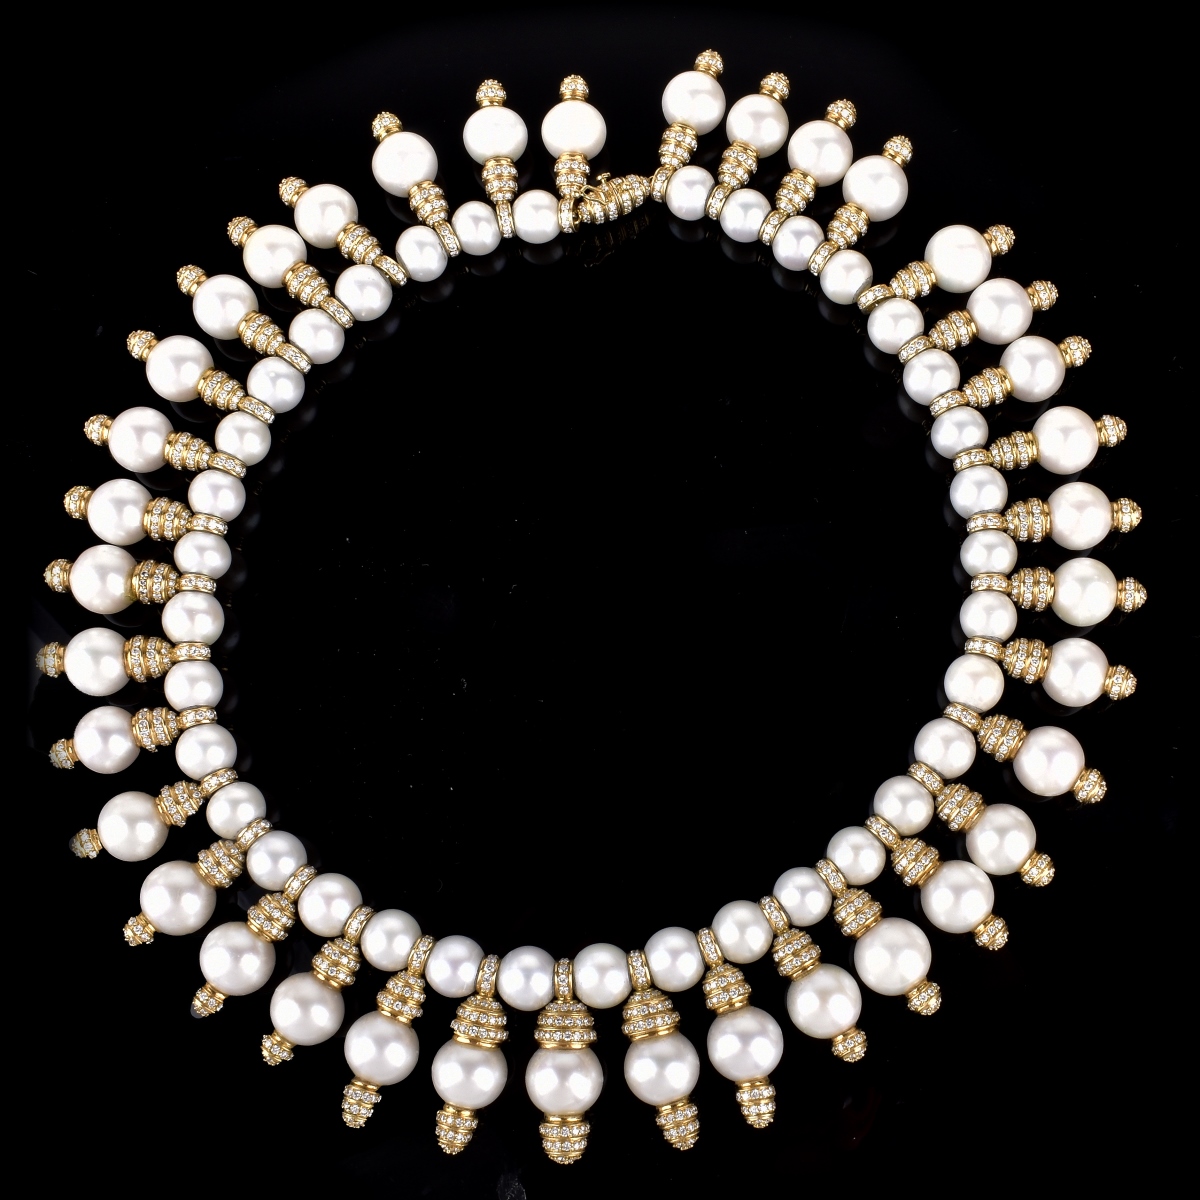 25.0ct TW Diamond, Pearl and 18K Gold Necklace